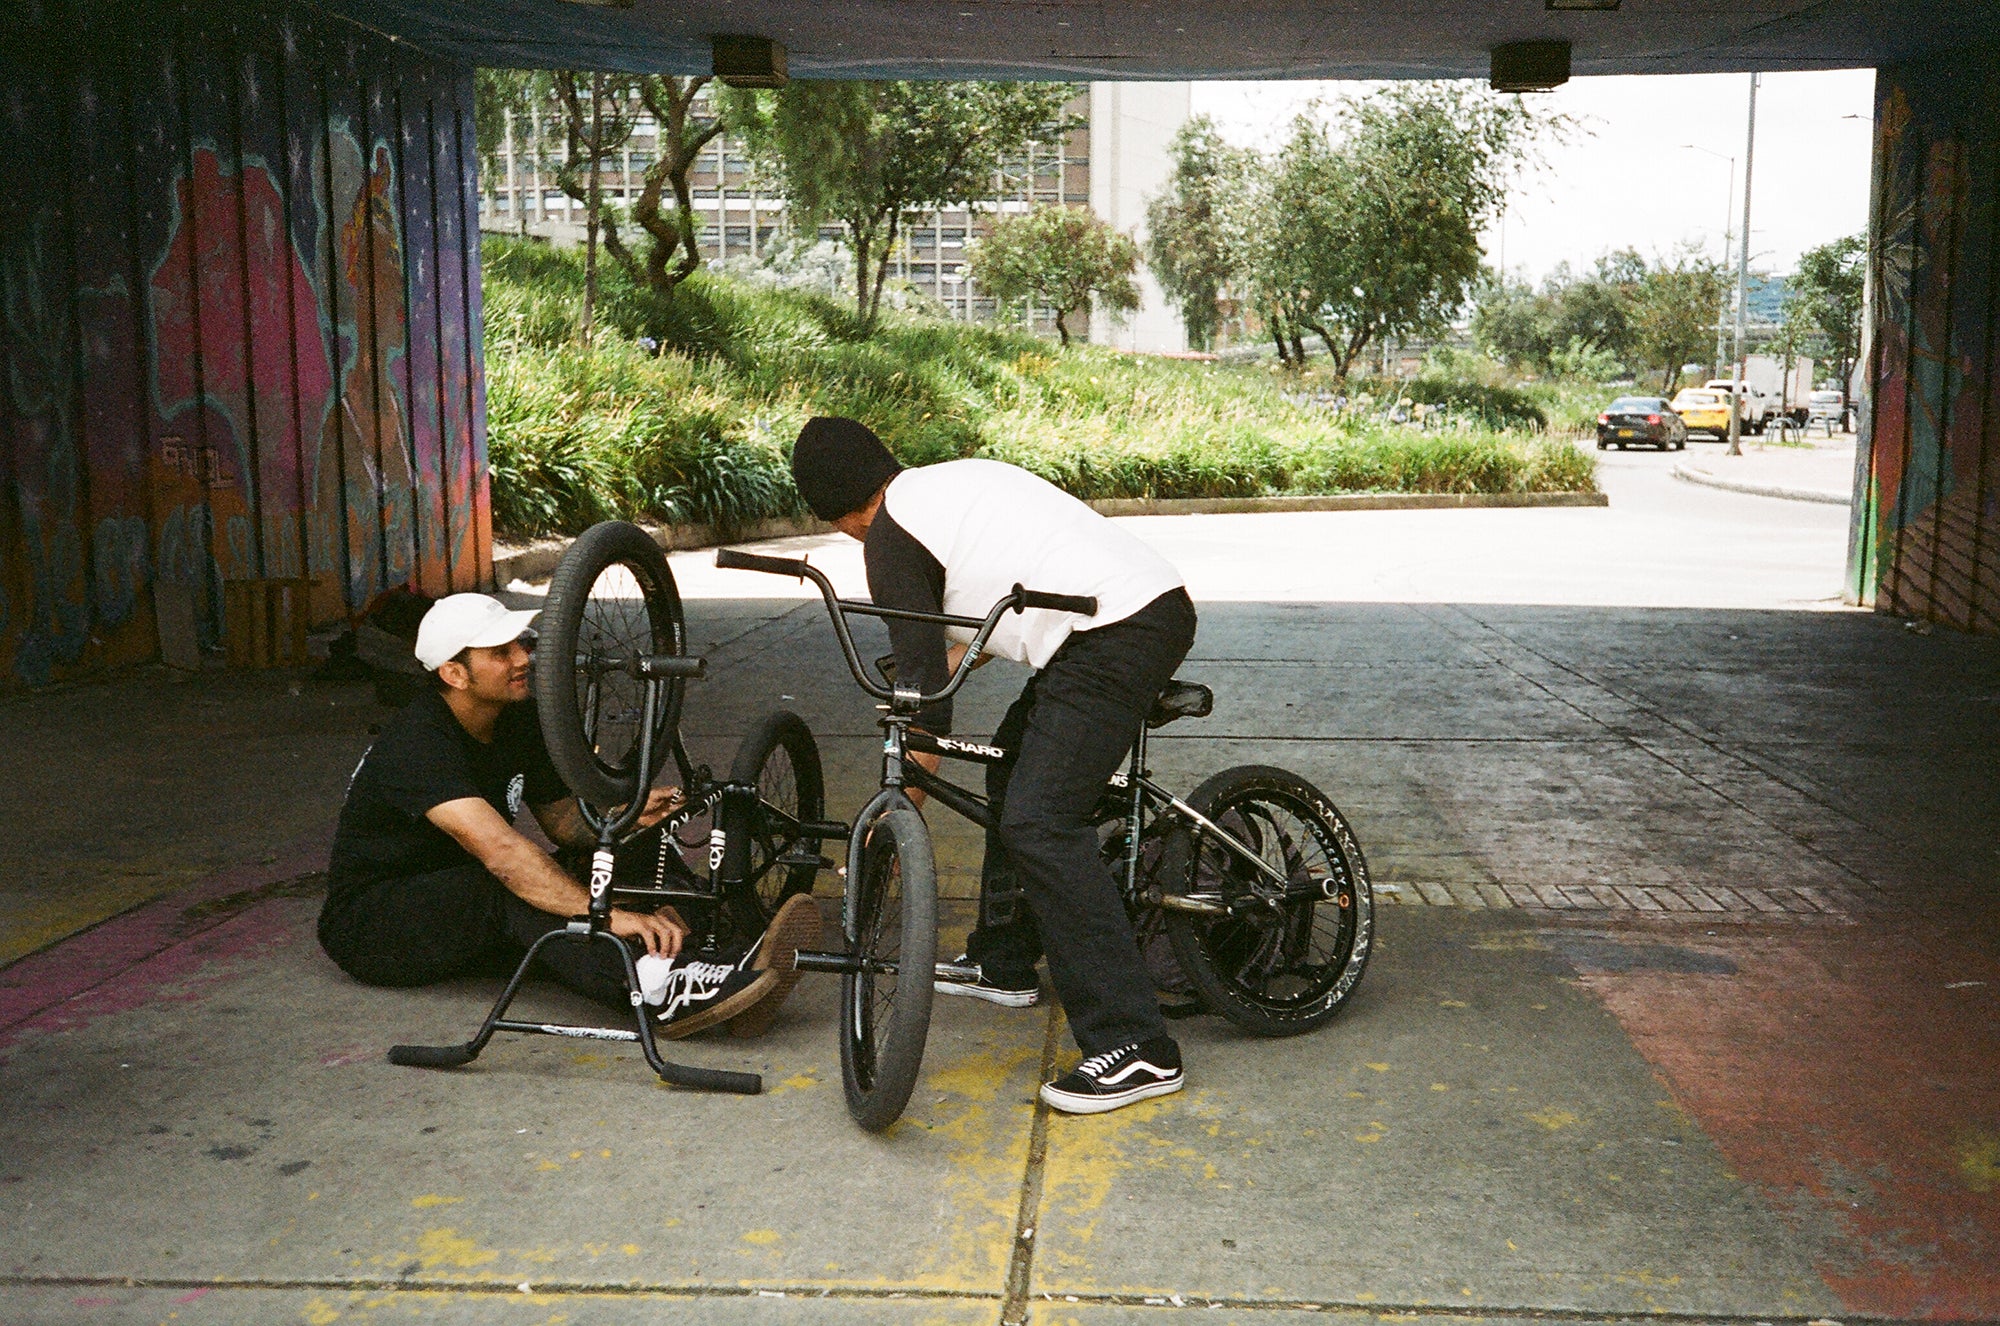 Team riders working on their bikes